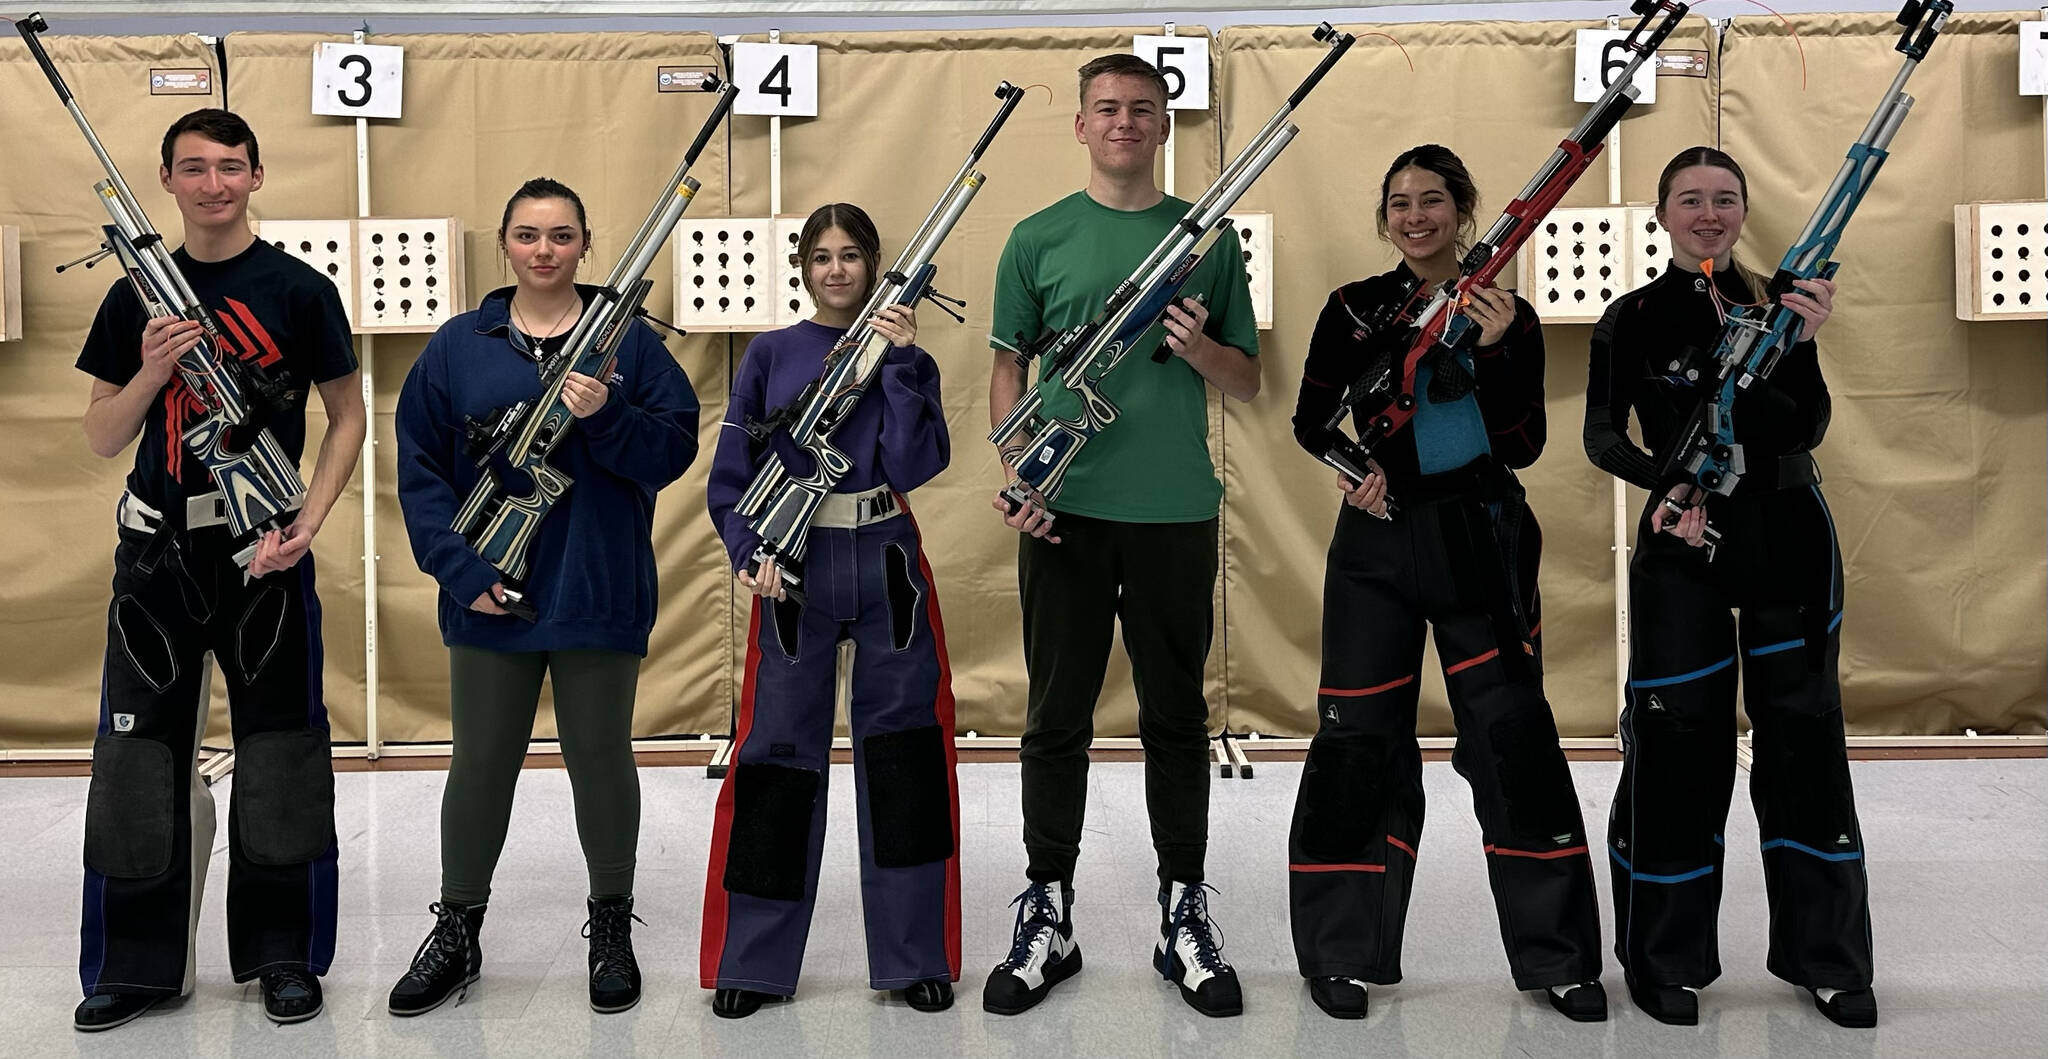 Five members of the Sabertooth Shooting Squad in Oak Harbor are competing at the Pardini Nationals that takes place at Camp Perry, Ohio, in late January. (Photo courtesy of Victor Zarate)